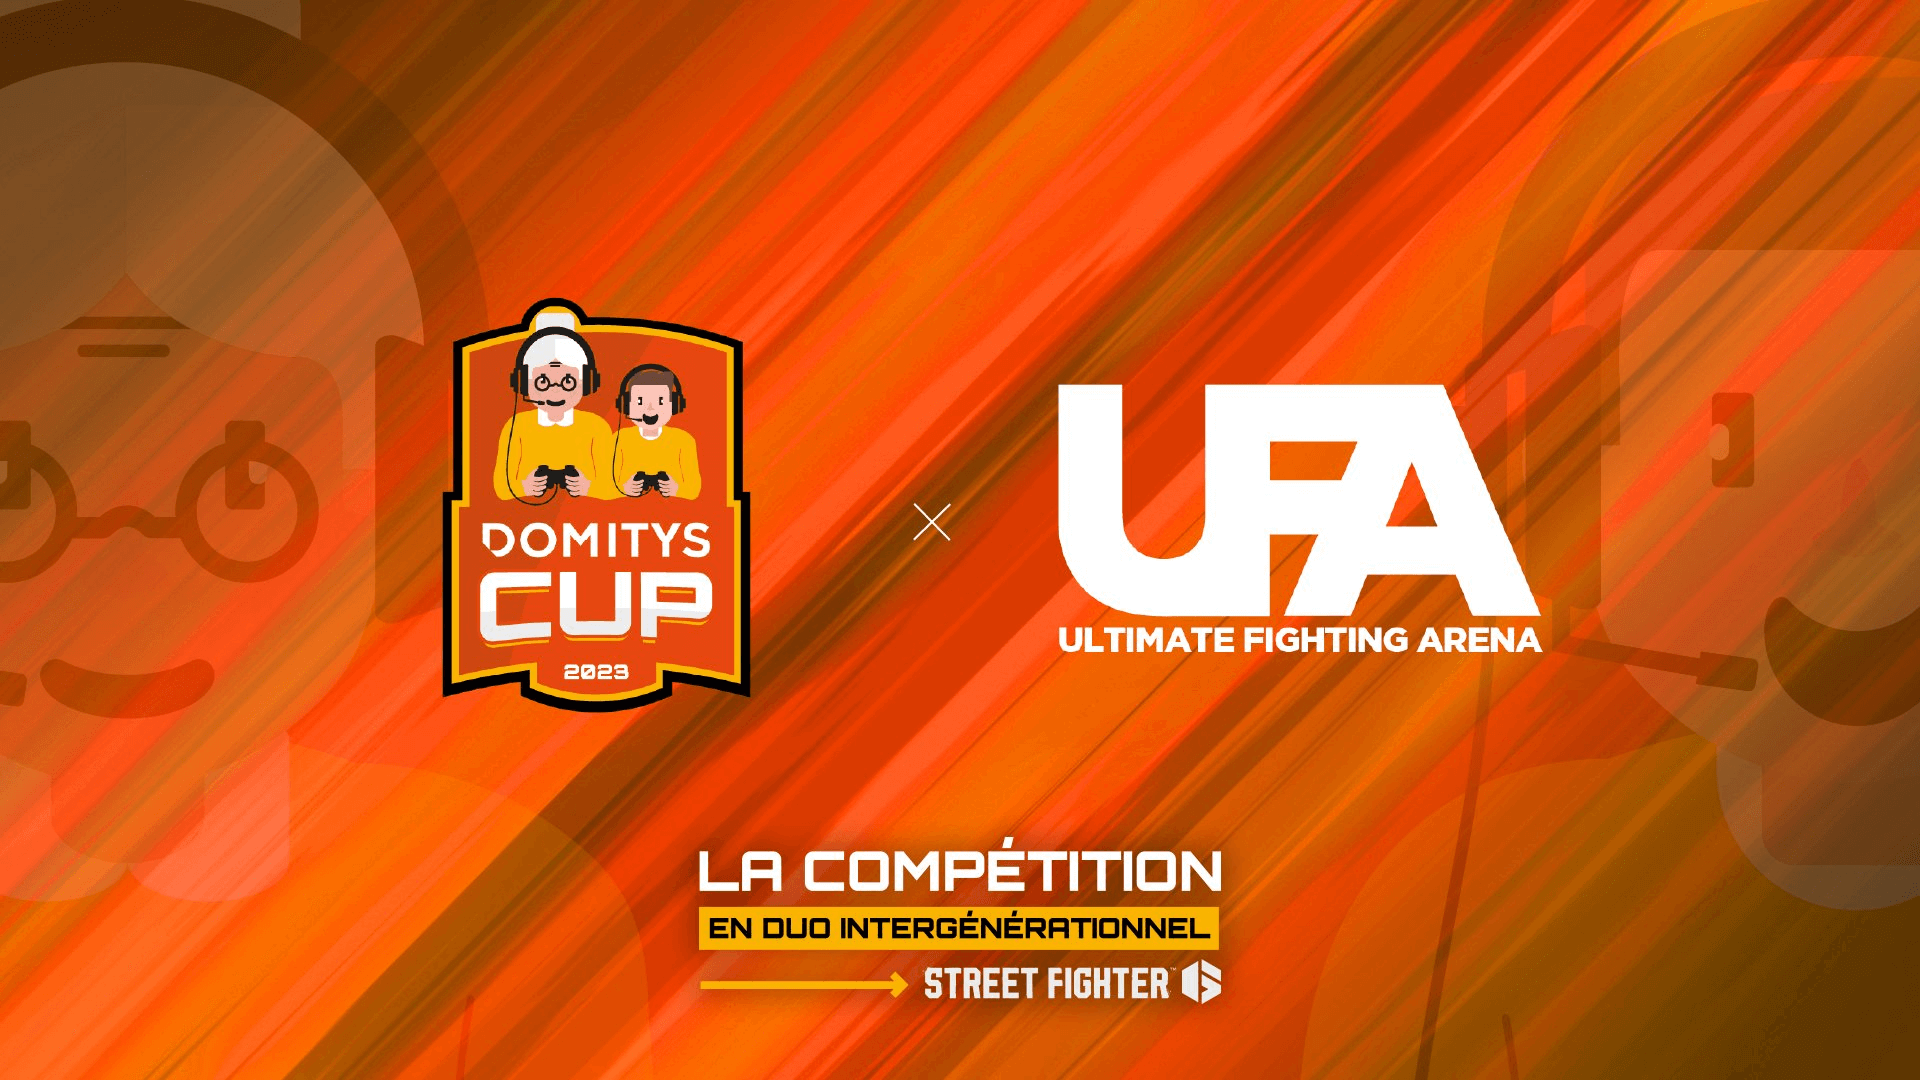 The Finals of the Intergenerational Domitys Cup will be at UFA 2023